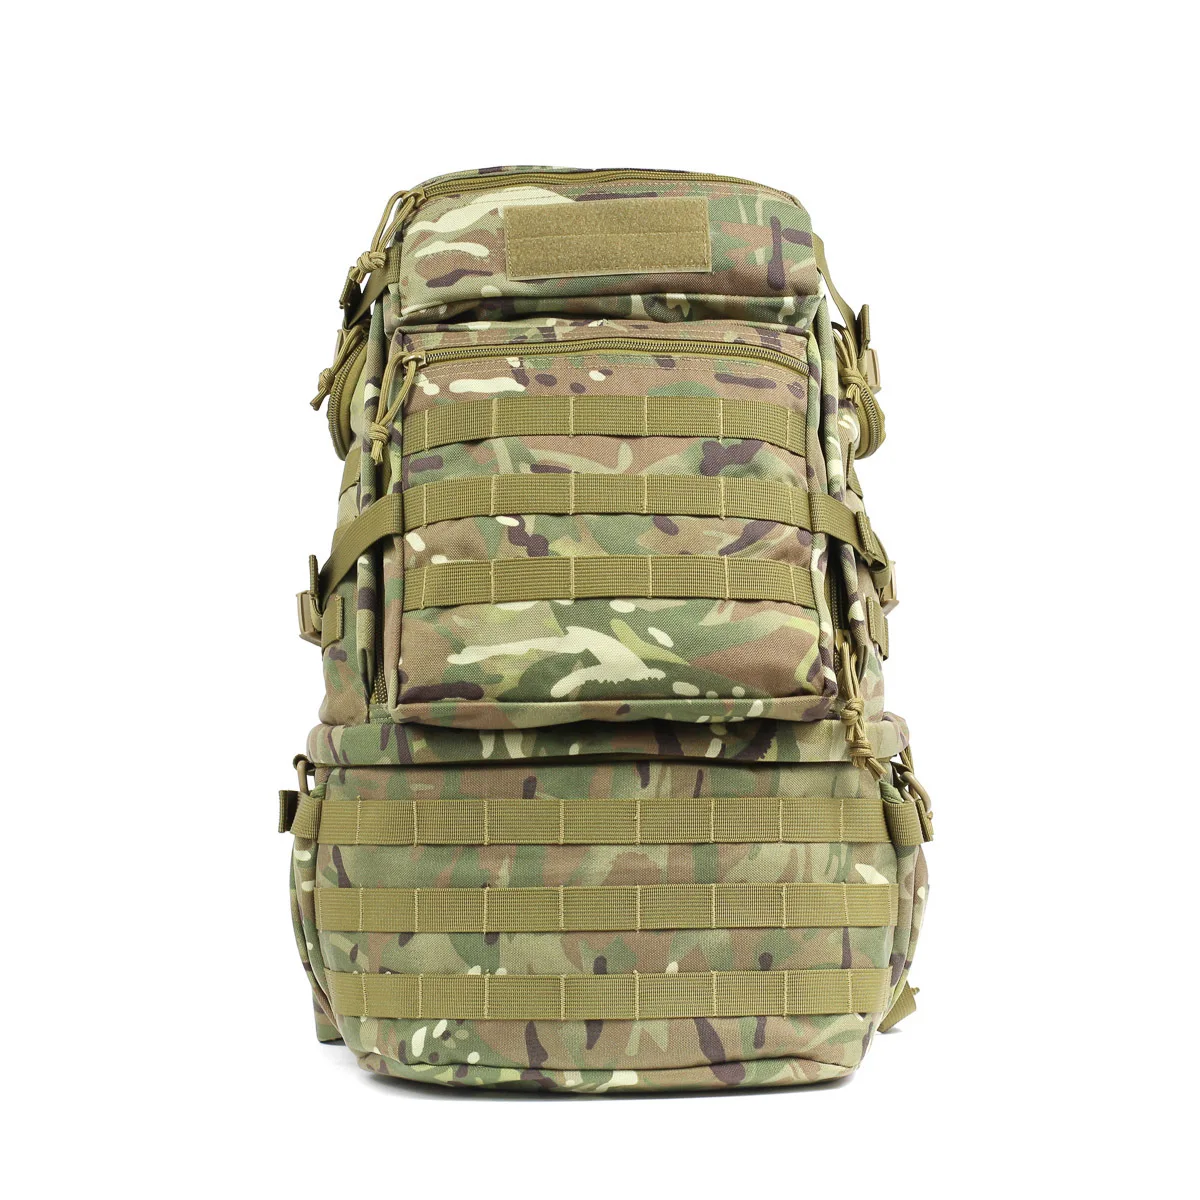 

1050D Nylon Outdoor Mountaineering Bag Tactical Backpack Hiking Bag Leisure Travel Riding Bag 55L